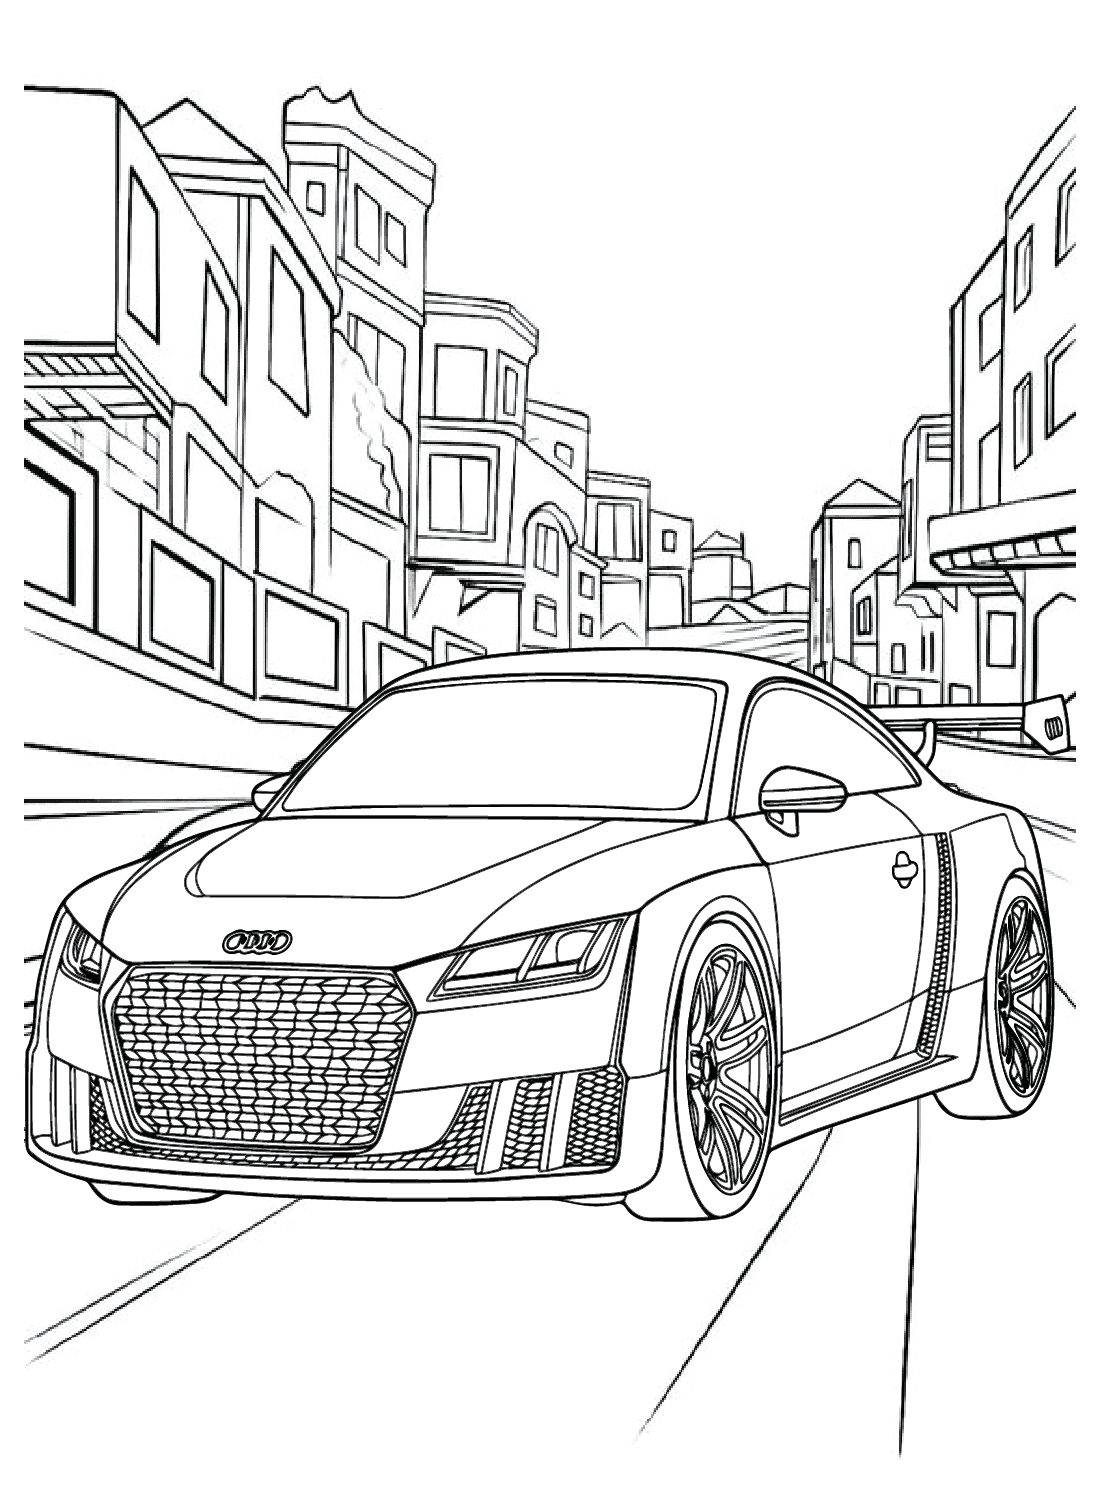 Audi TT Clubsport Turbo Coloring Page from Audi